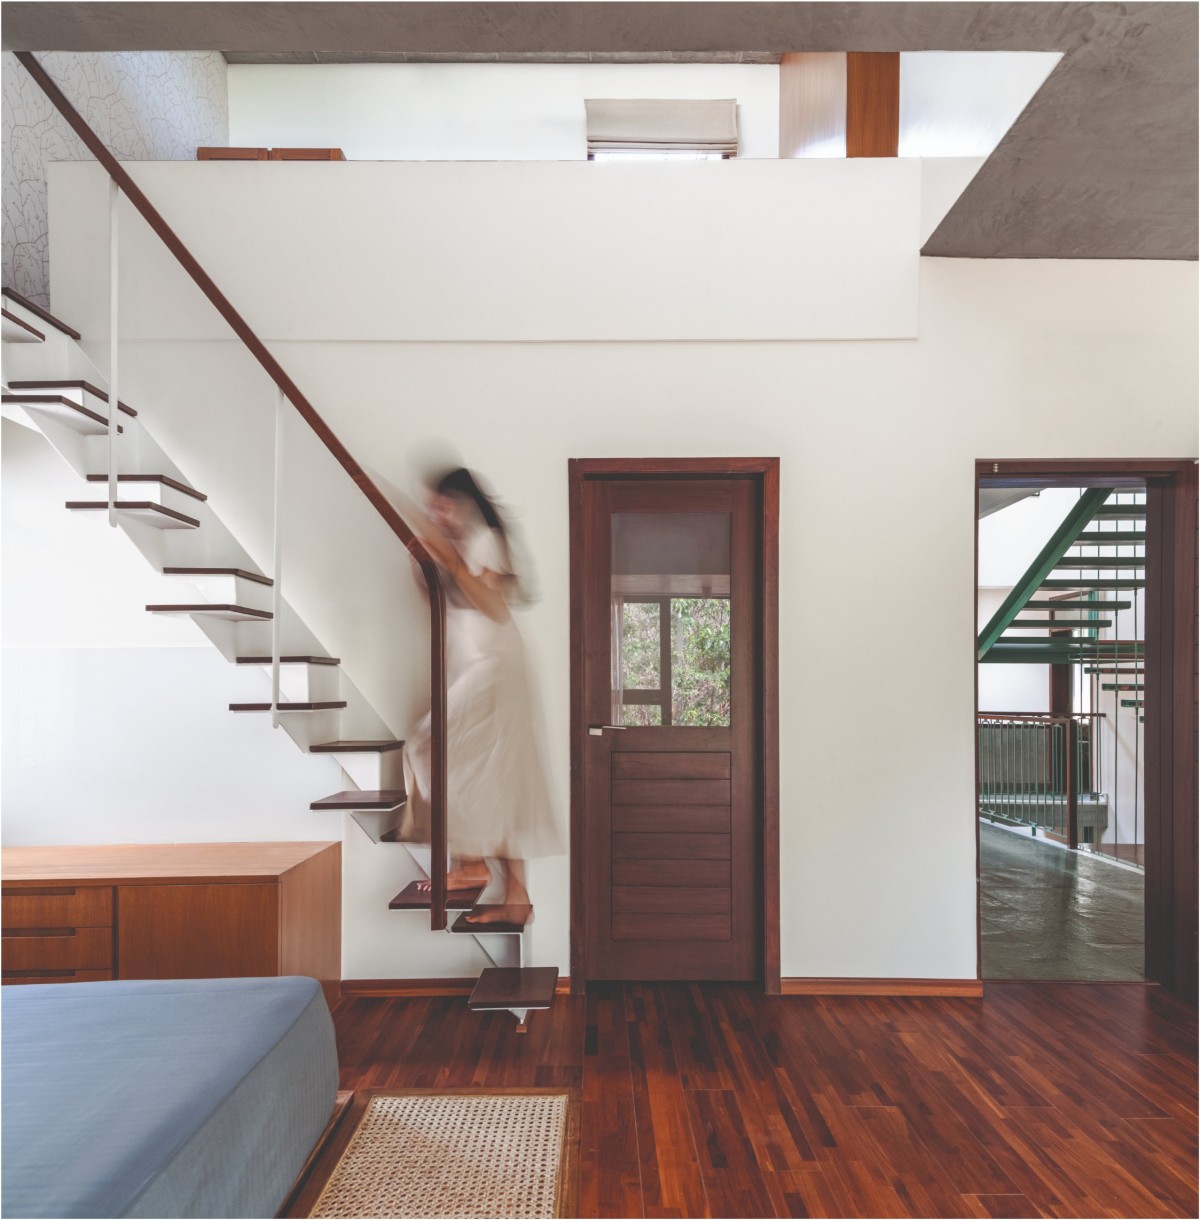 Alternating Tread staircase -Nairy’s residence by Funktion design